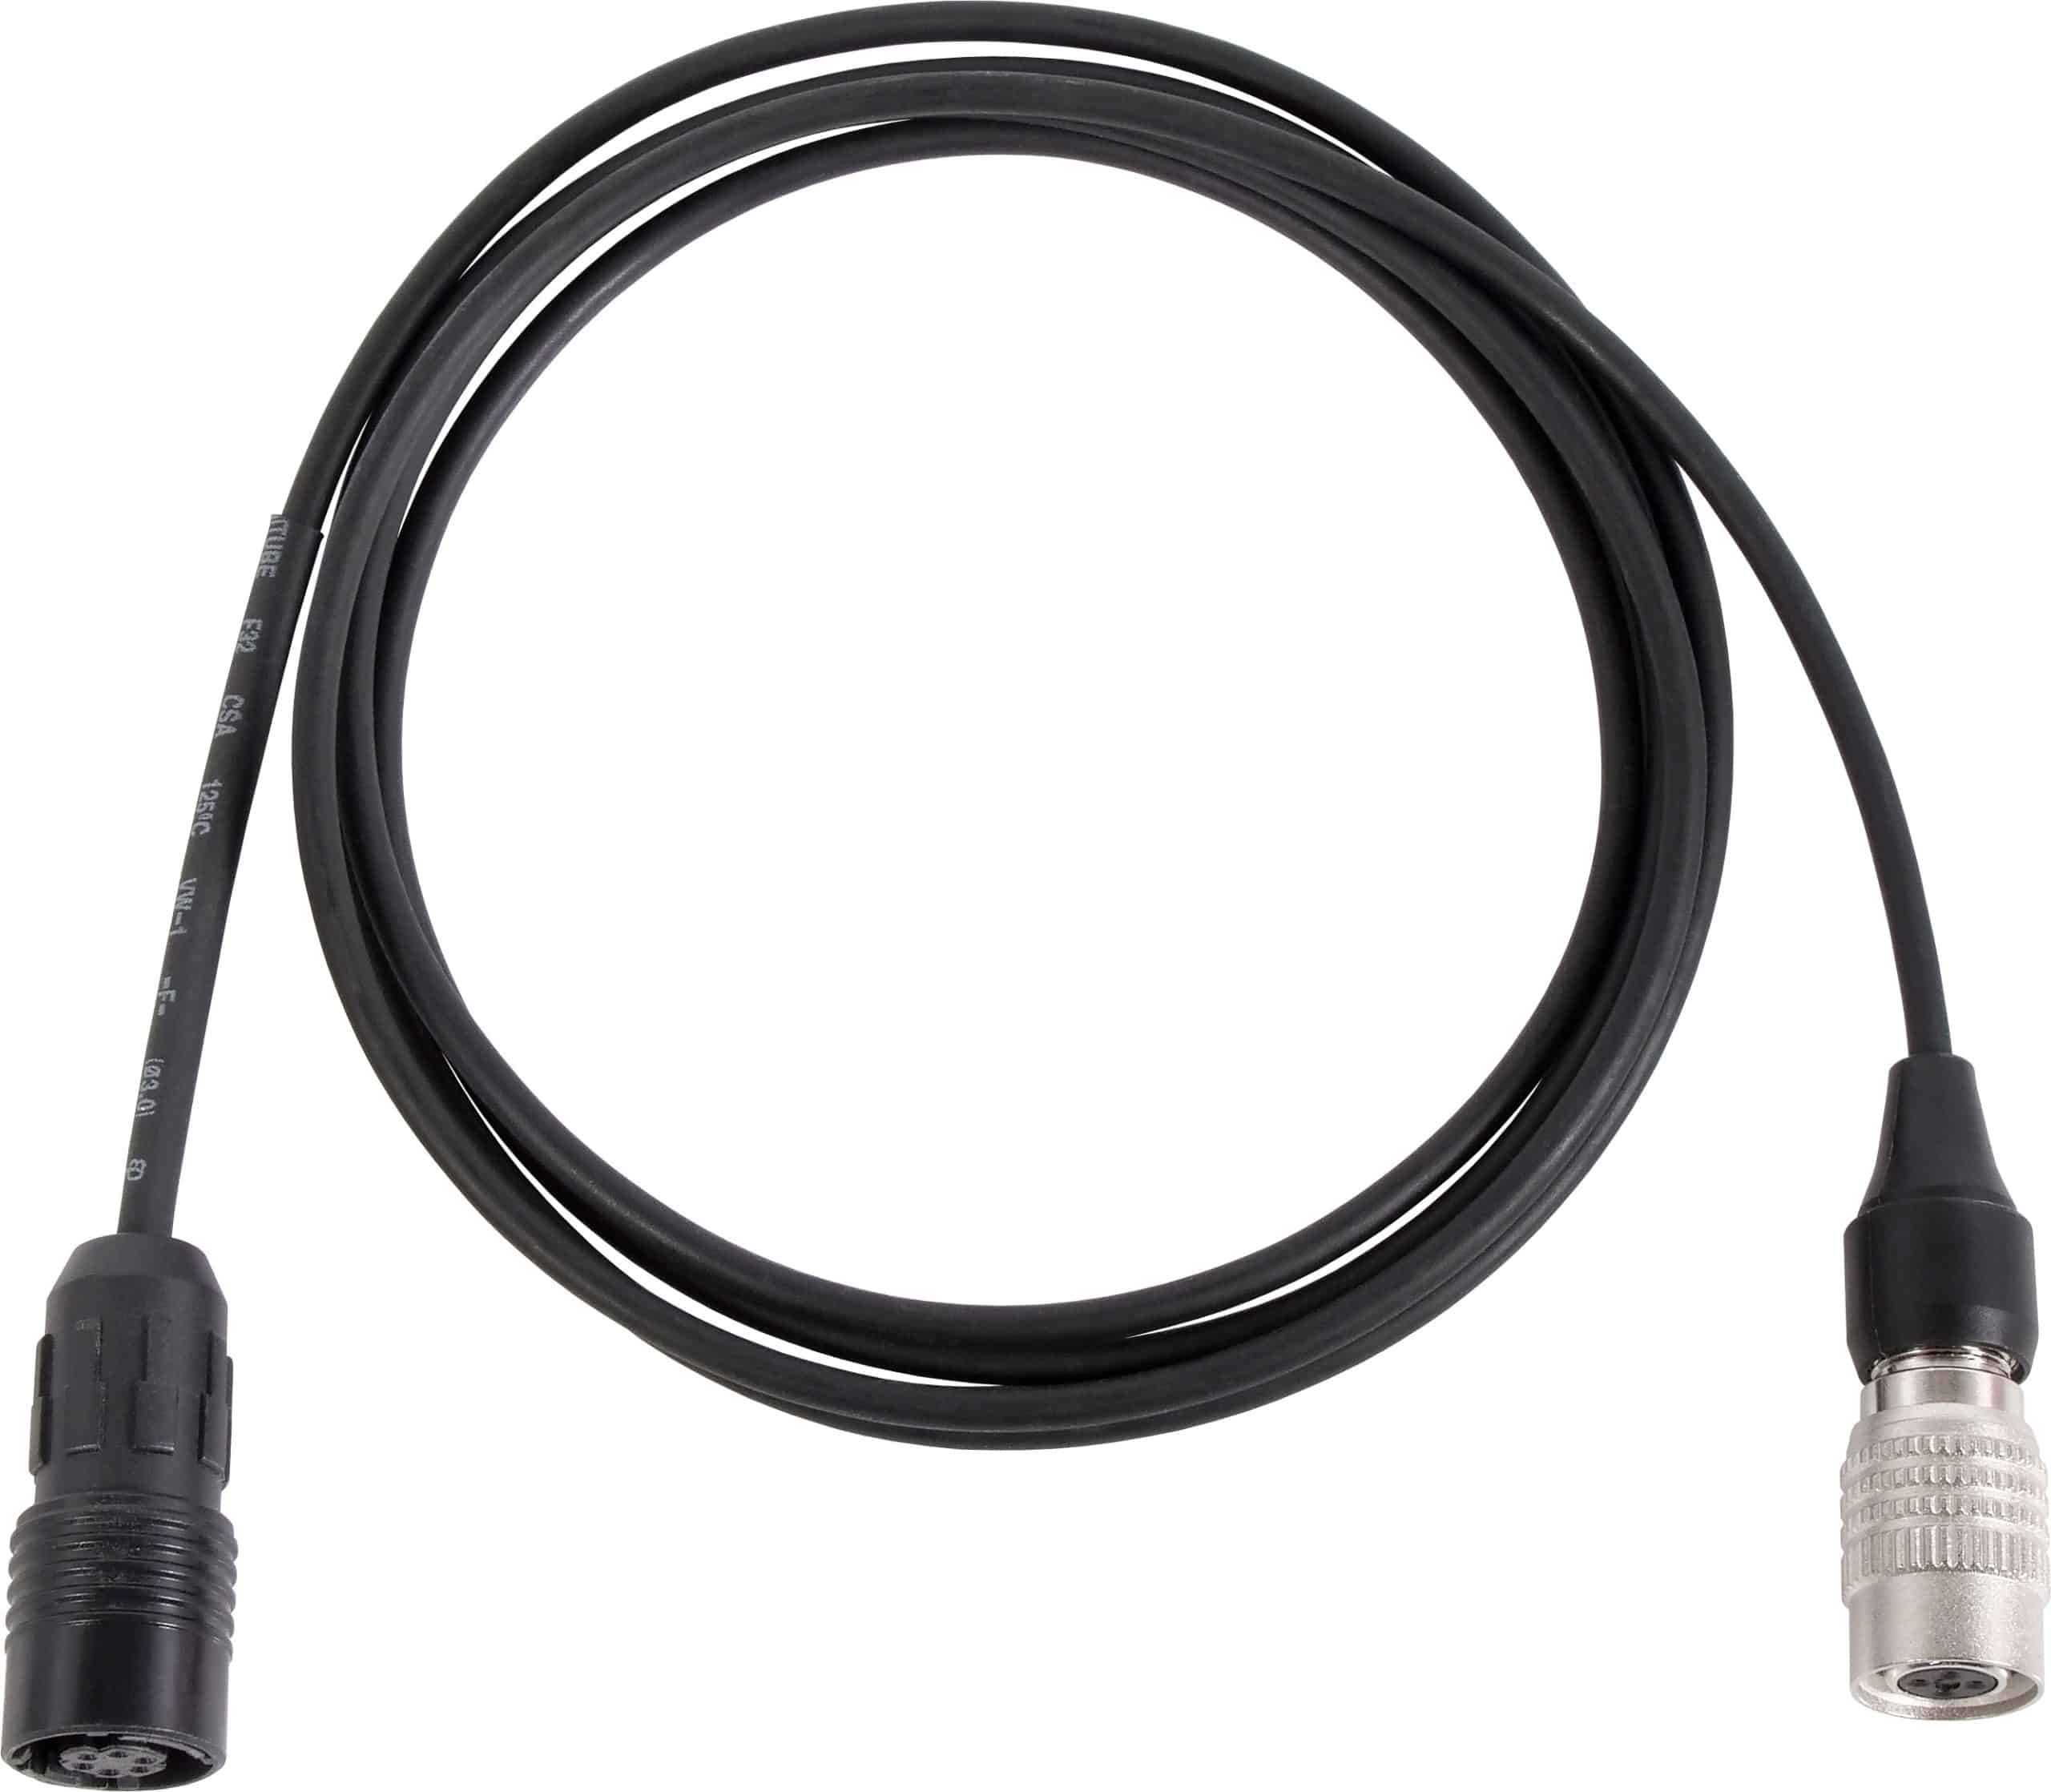 CBL2OATBK Cable – For H2O7 Wireless Headset Mic Cable for Audio-Technica® systems